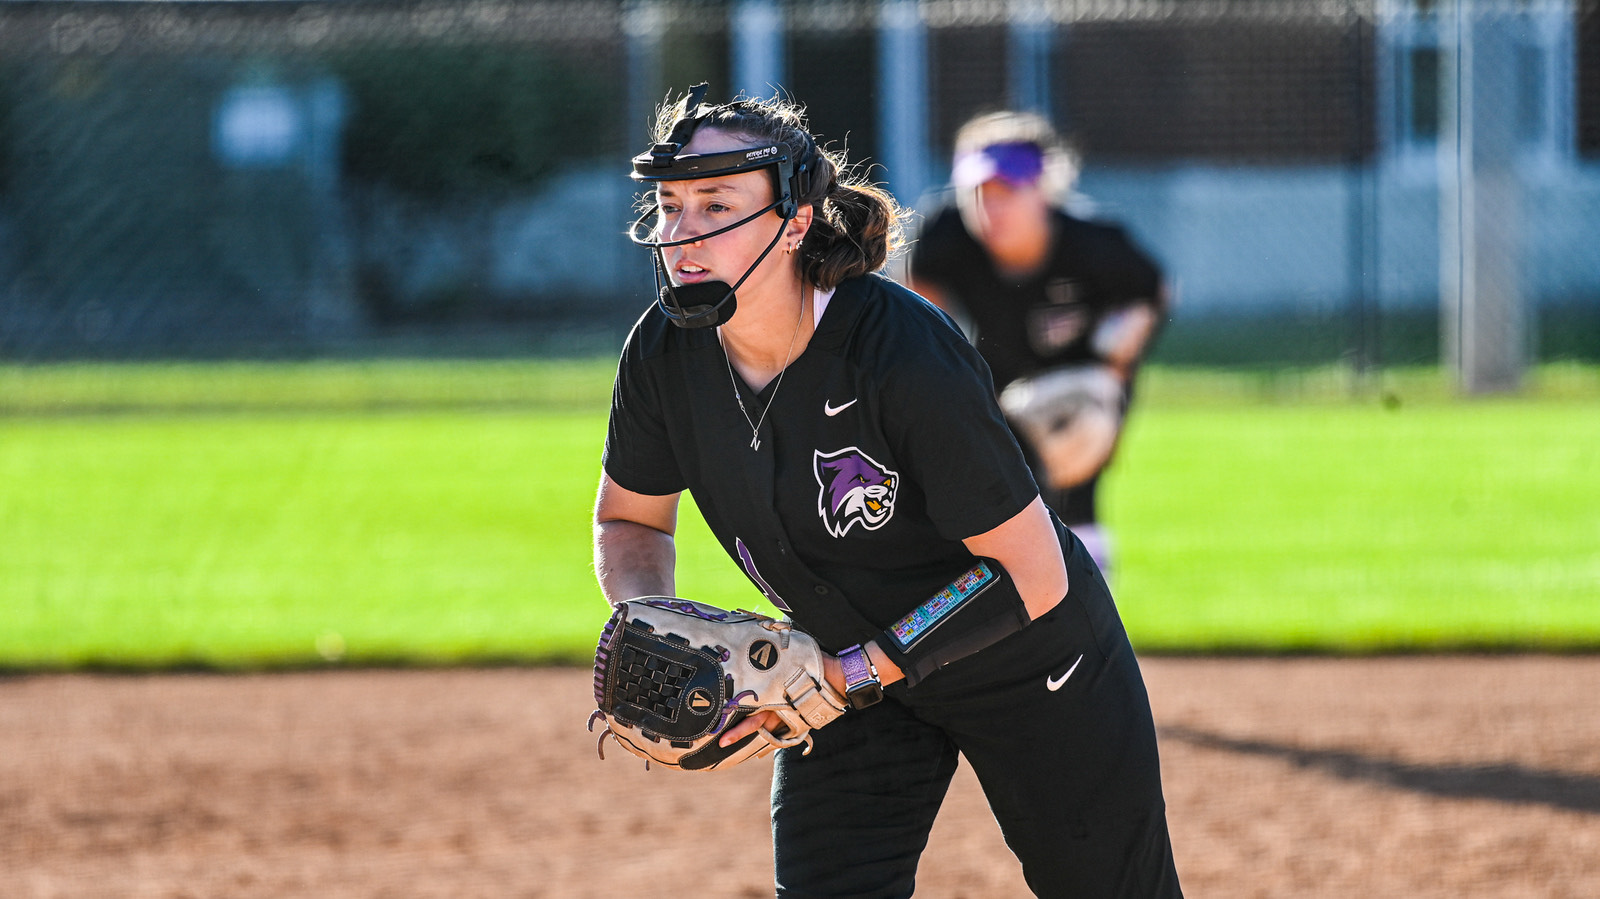 Lady Cats Drop Doubleheader to Visiting Tigers